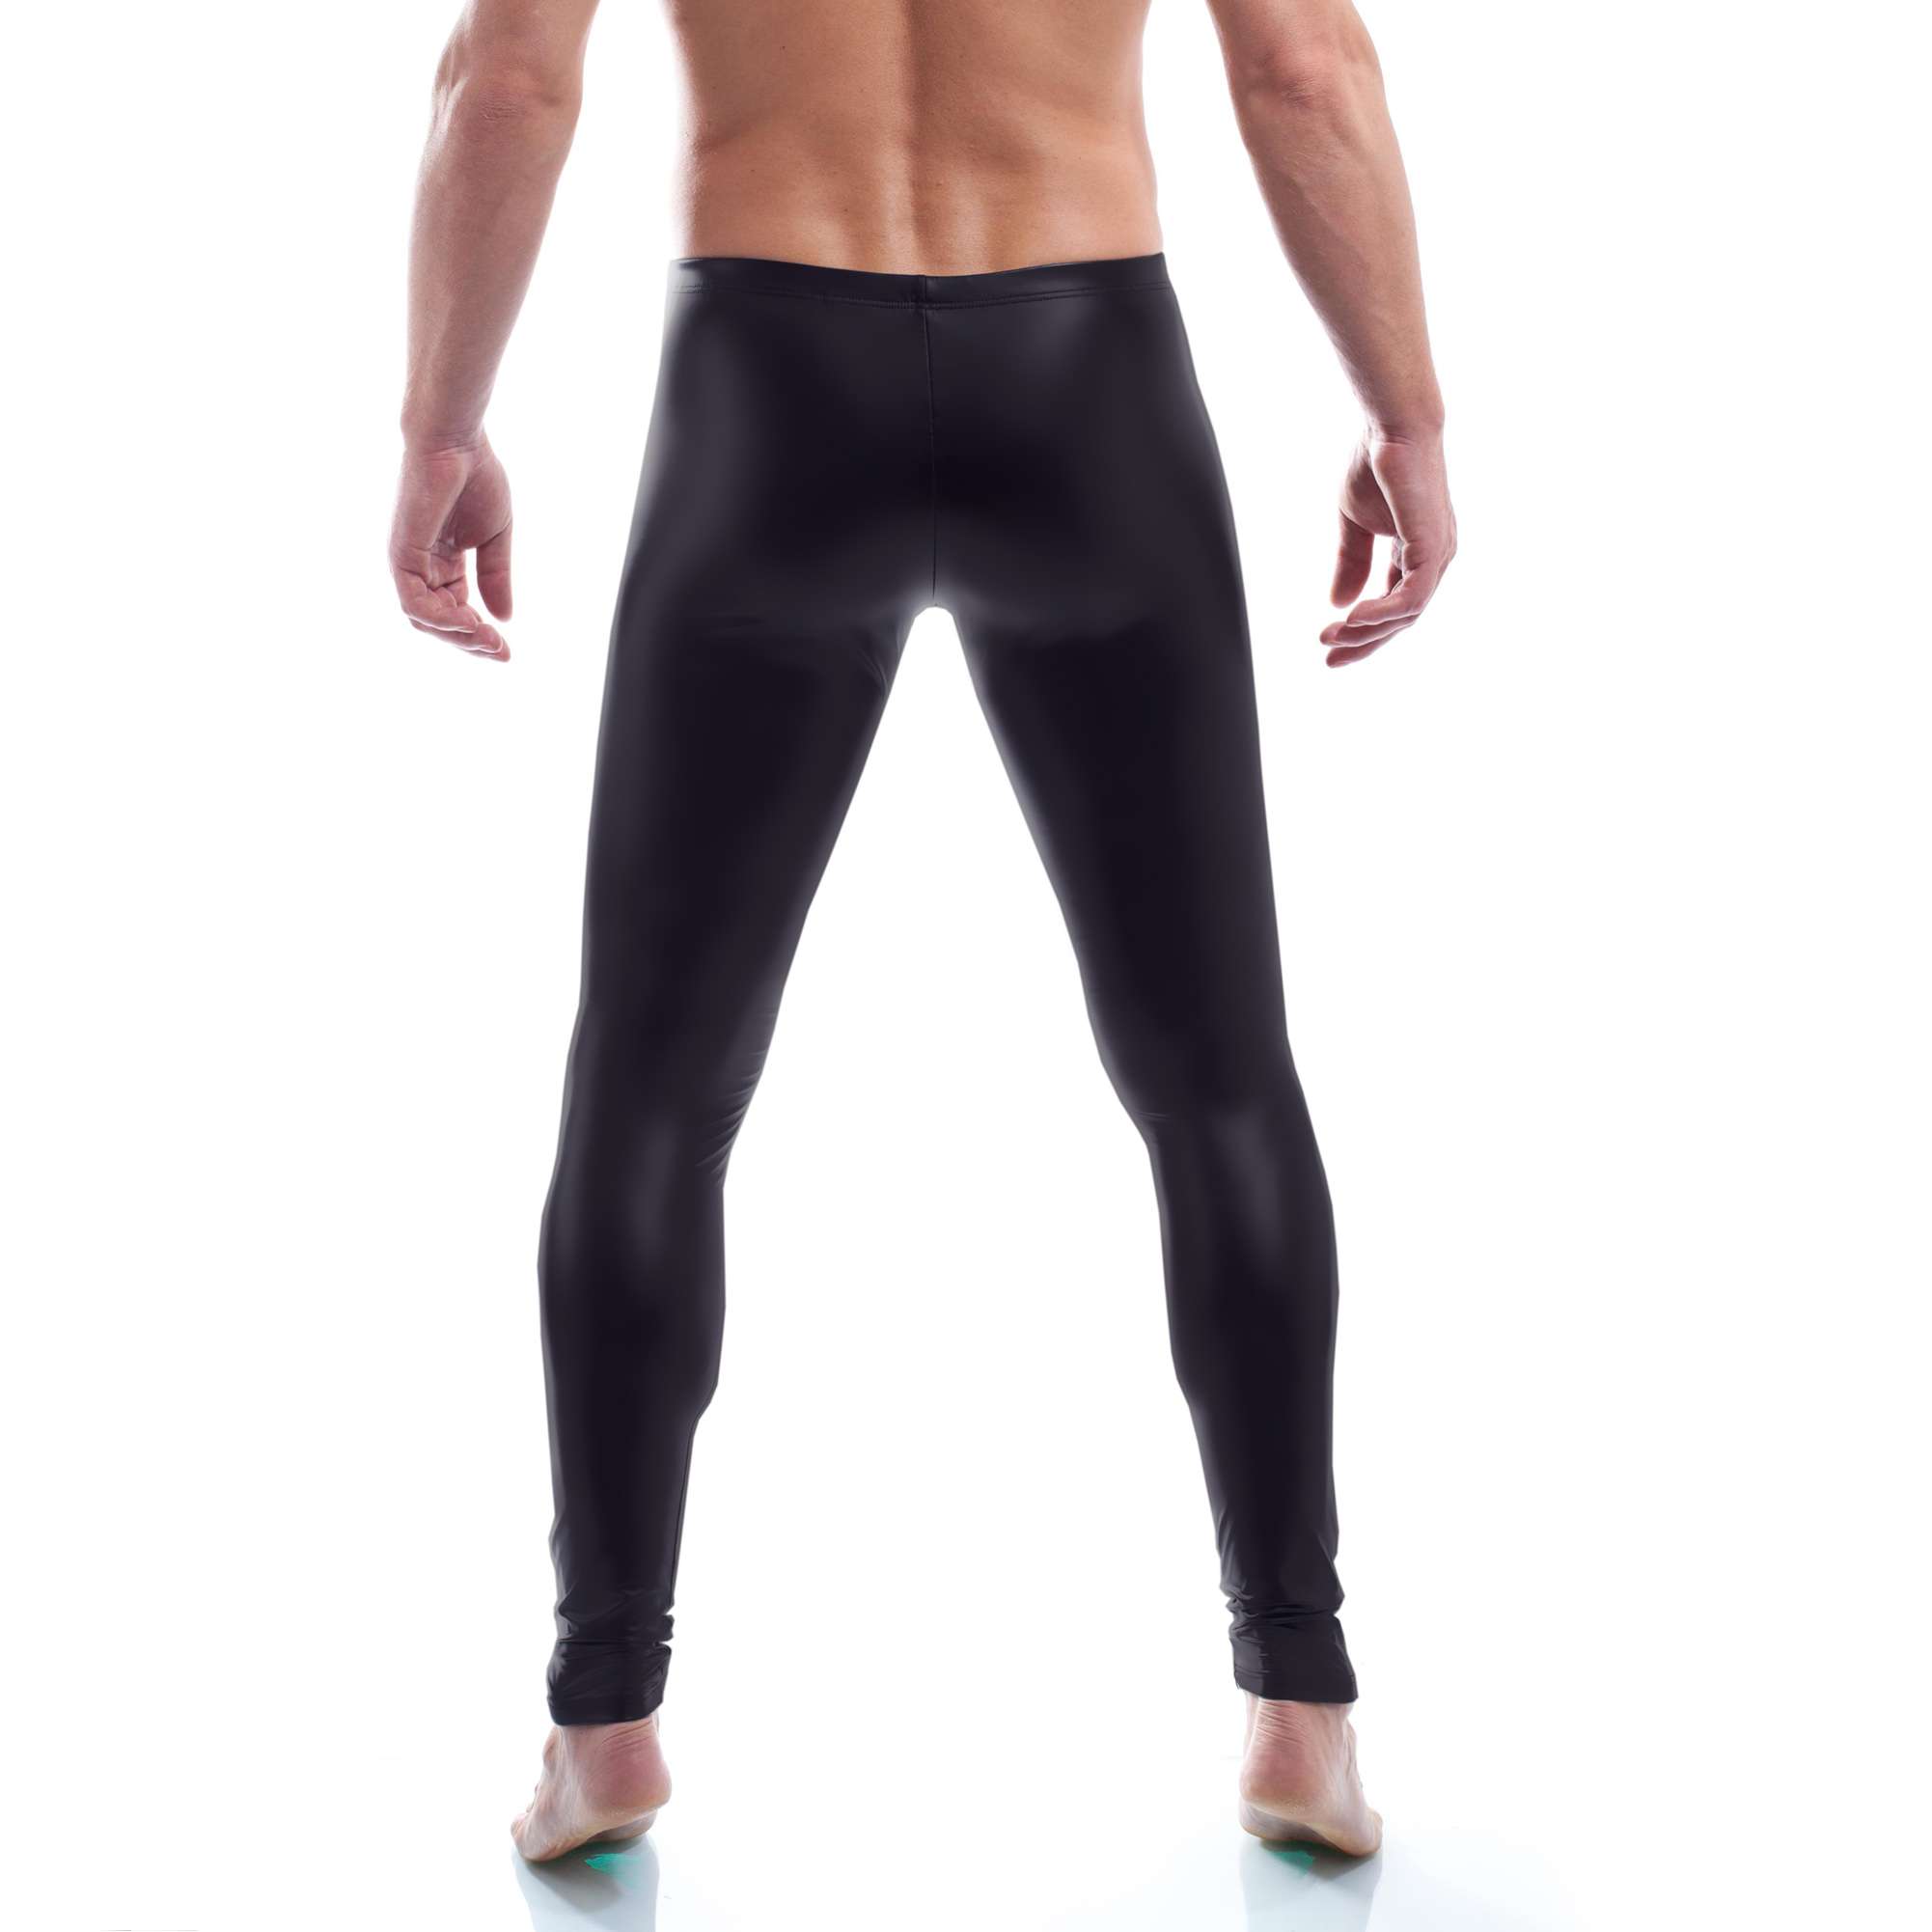 leatherlike Synlex³ mat swim leggings belongs to the Wojoer LIVE-products. And will be produced on demand.
Sizes
S, M, L, XL, XXL, XXXL
Material
Synlex³: 53% polyamide |6% spandex | 41% polyurethane

Badedeulxe edging: 80% polyamide | 20% spandex
Specials
LIVE Product | stretchy material | skinny…